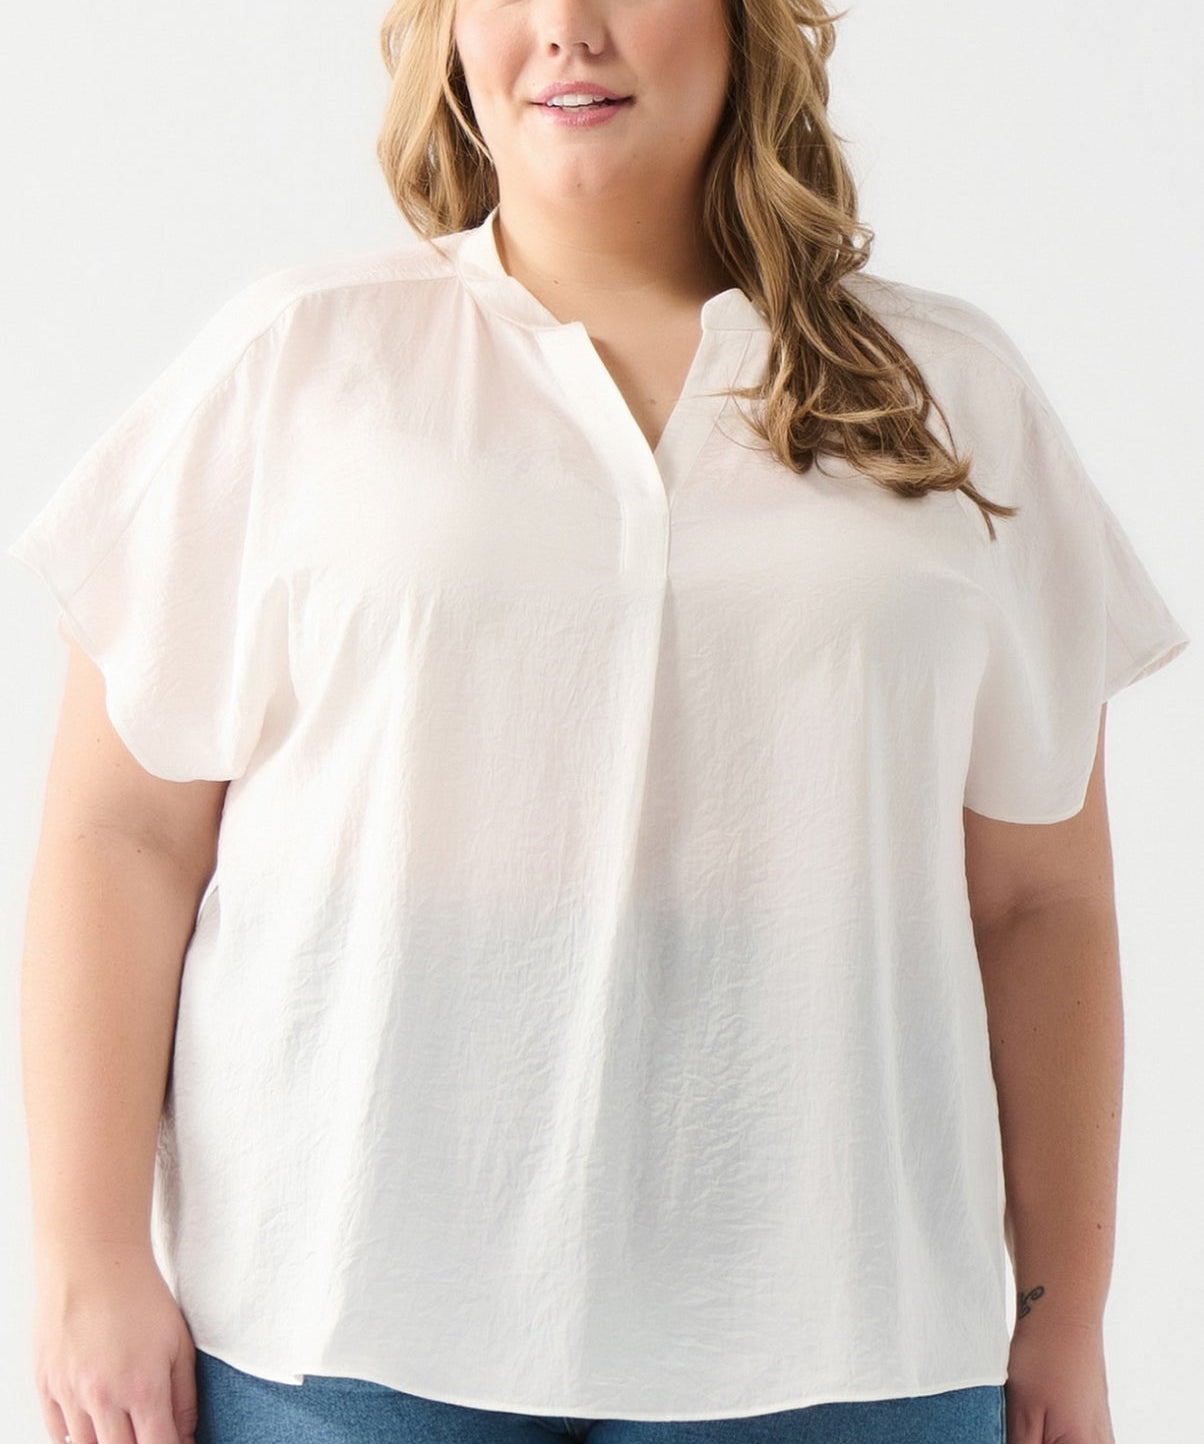 Plus sized satin top by Black Tape - Blue Sky Fashions & Lingerie